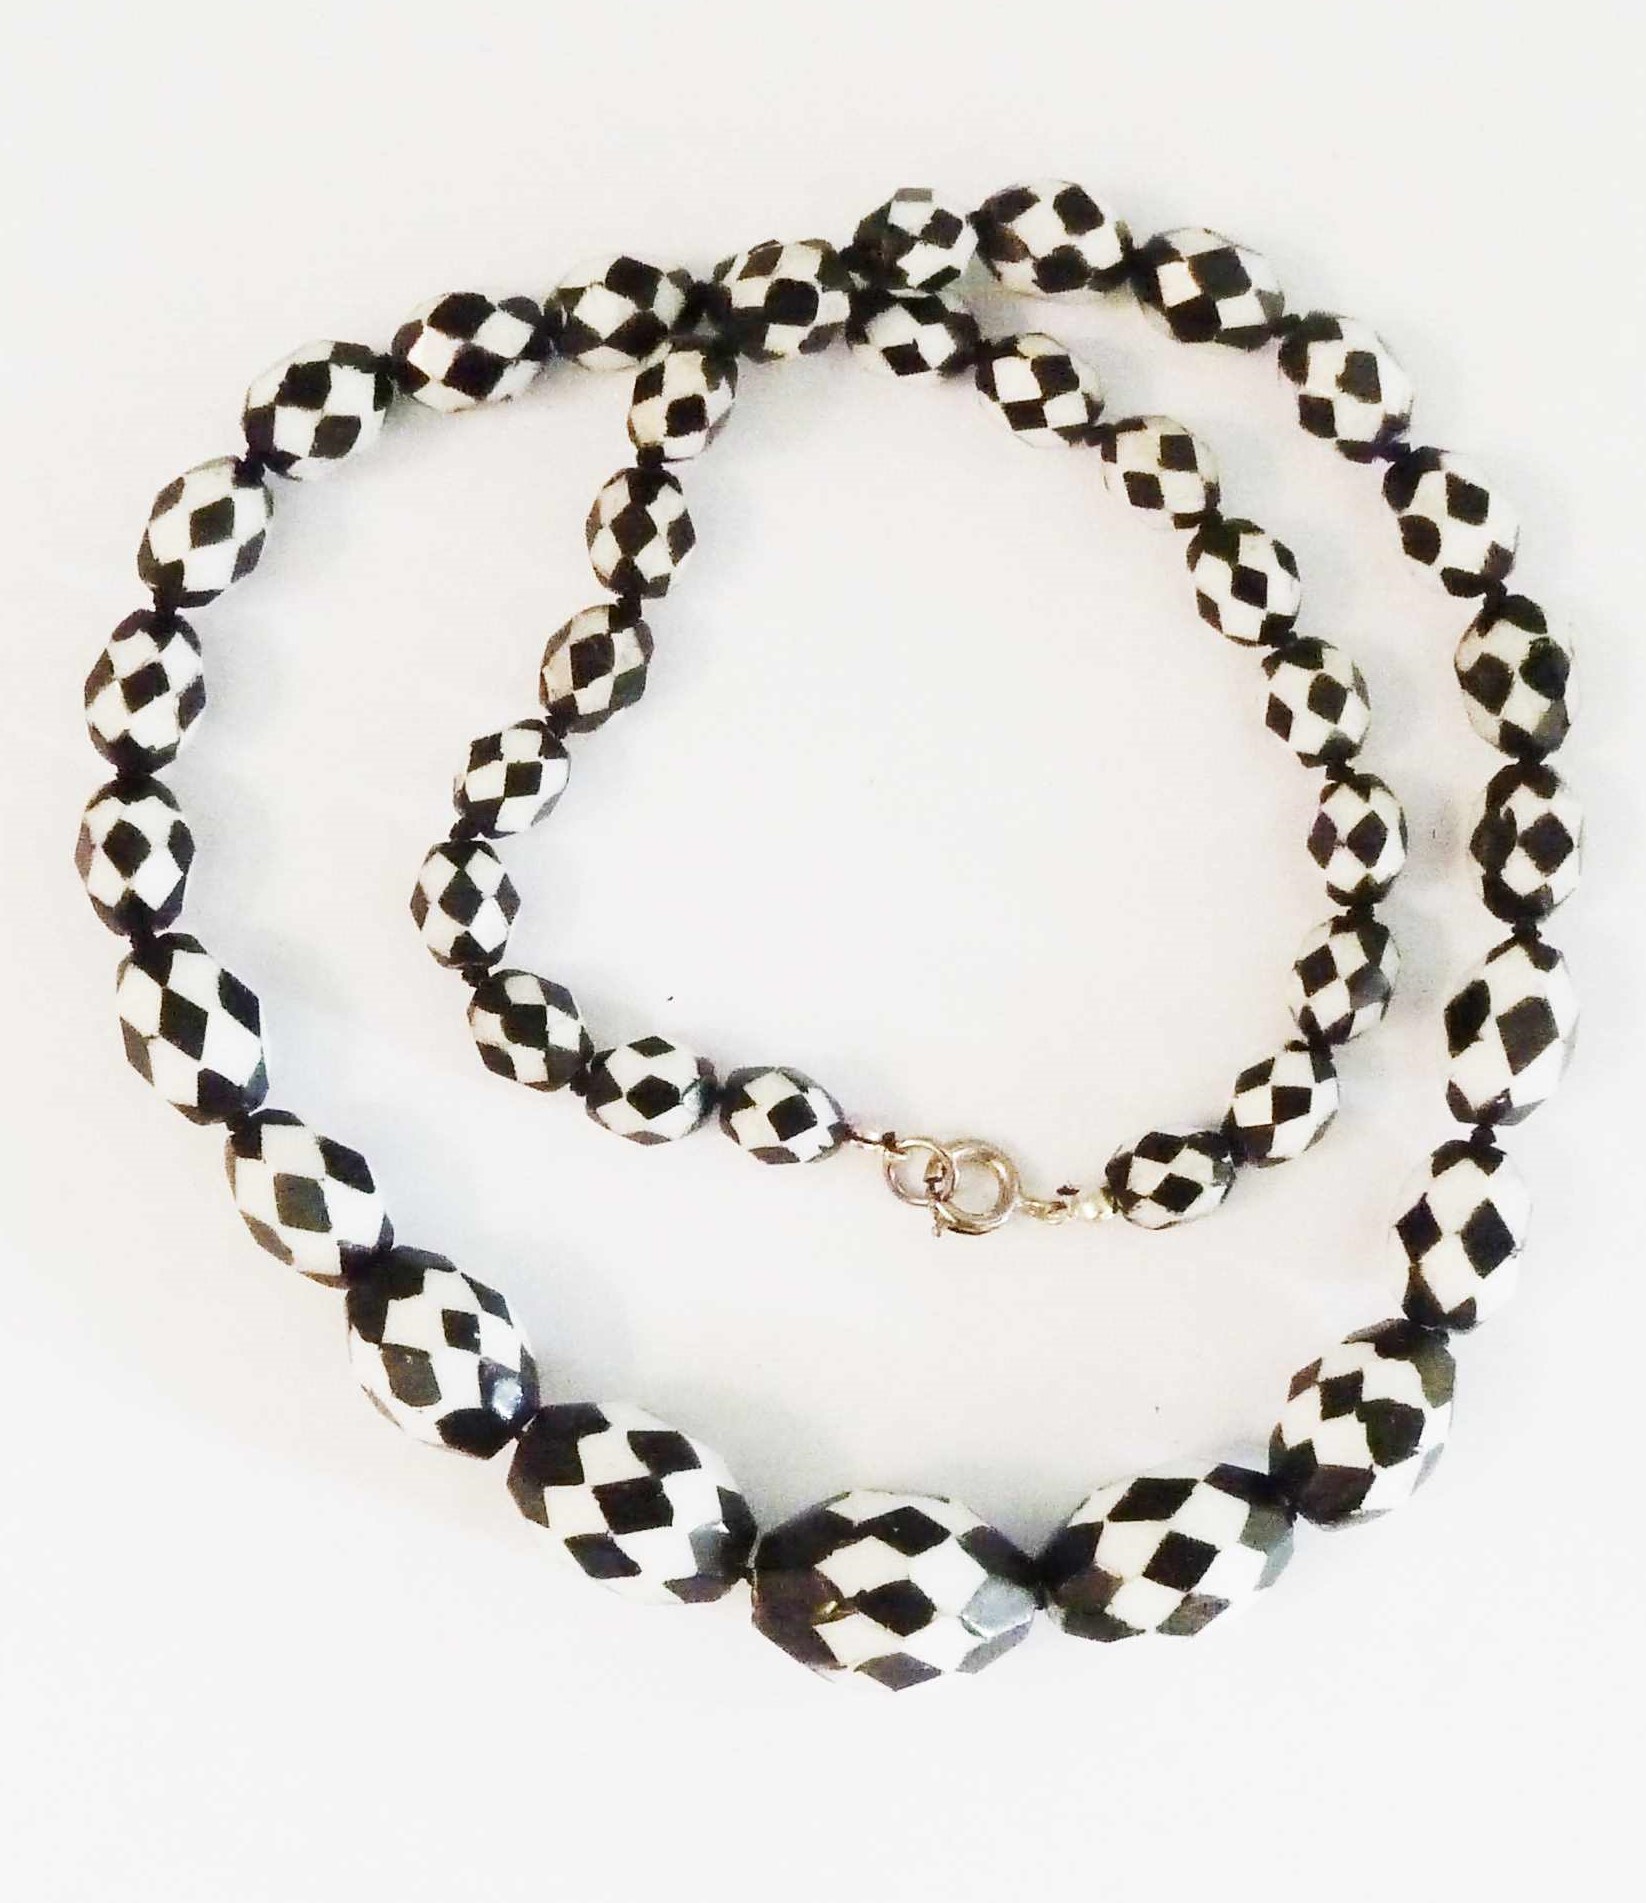 VINTAGE BLACK AND WHITE GLASS BEADS CUT INTO A DIAMOND PATTERN - BLACK OVER  WHITE